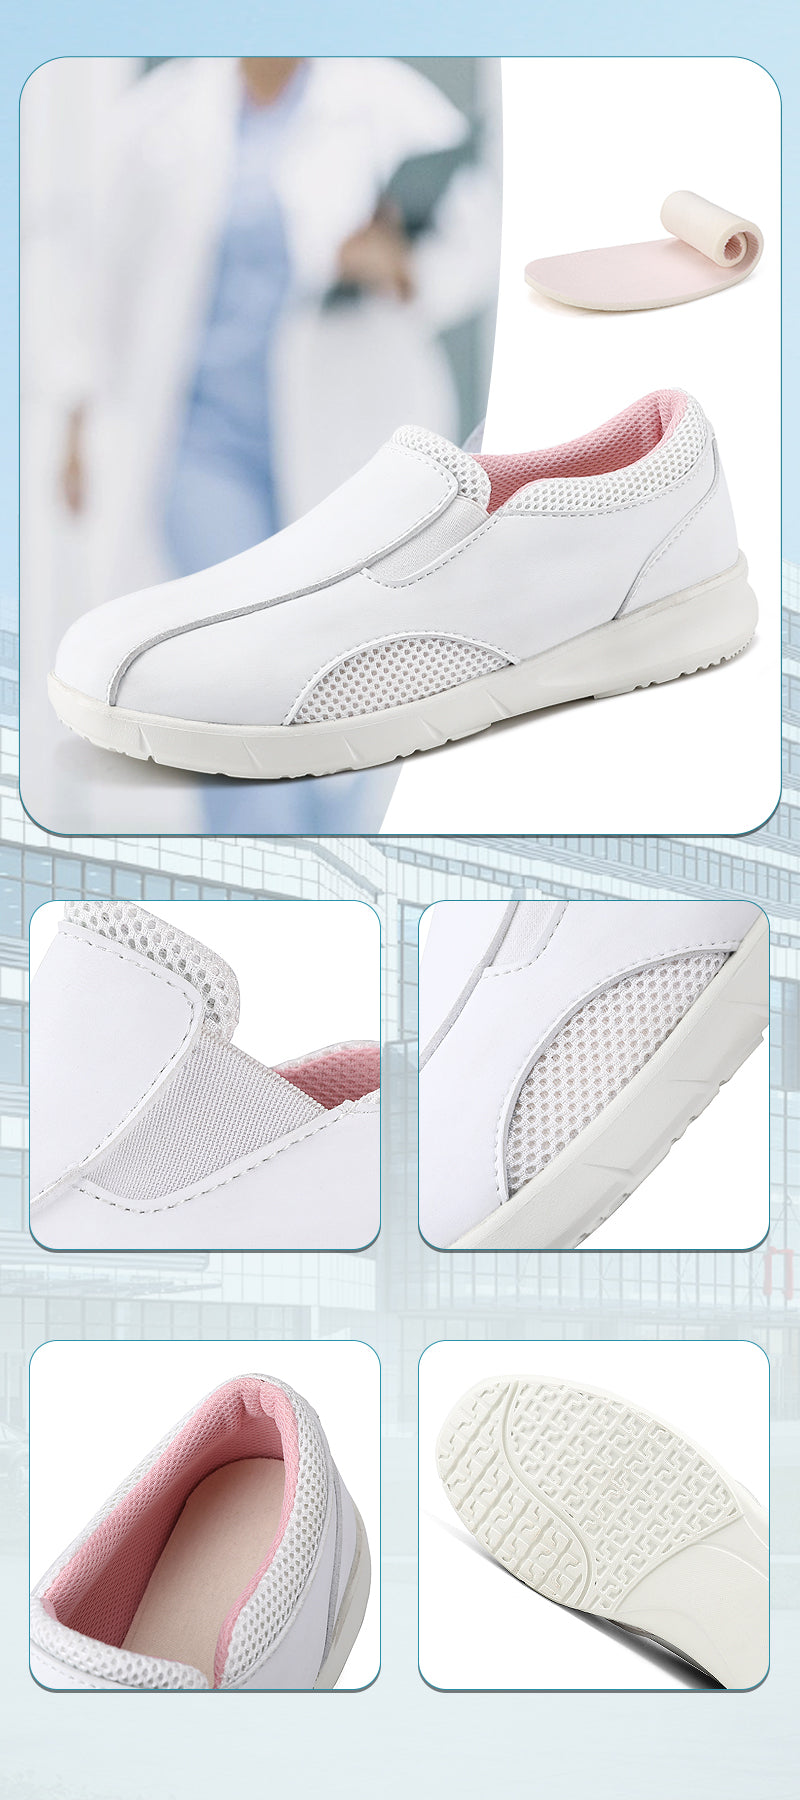 Customized logo non-slip comfortable breathable fashionable durable leather PU upper thickened hospital nurse shoes High heel